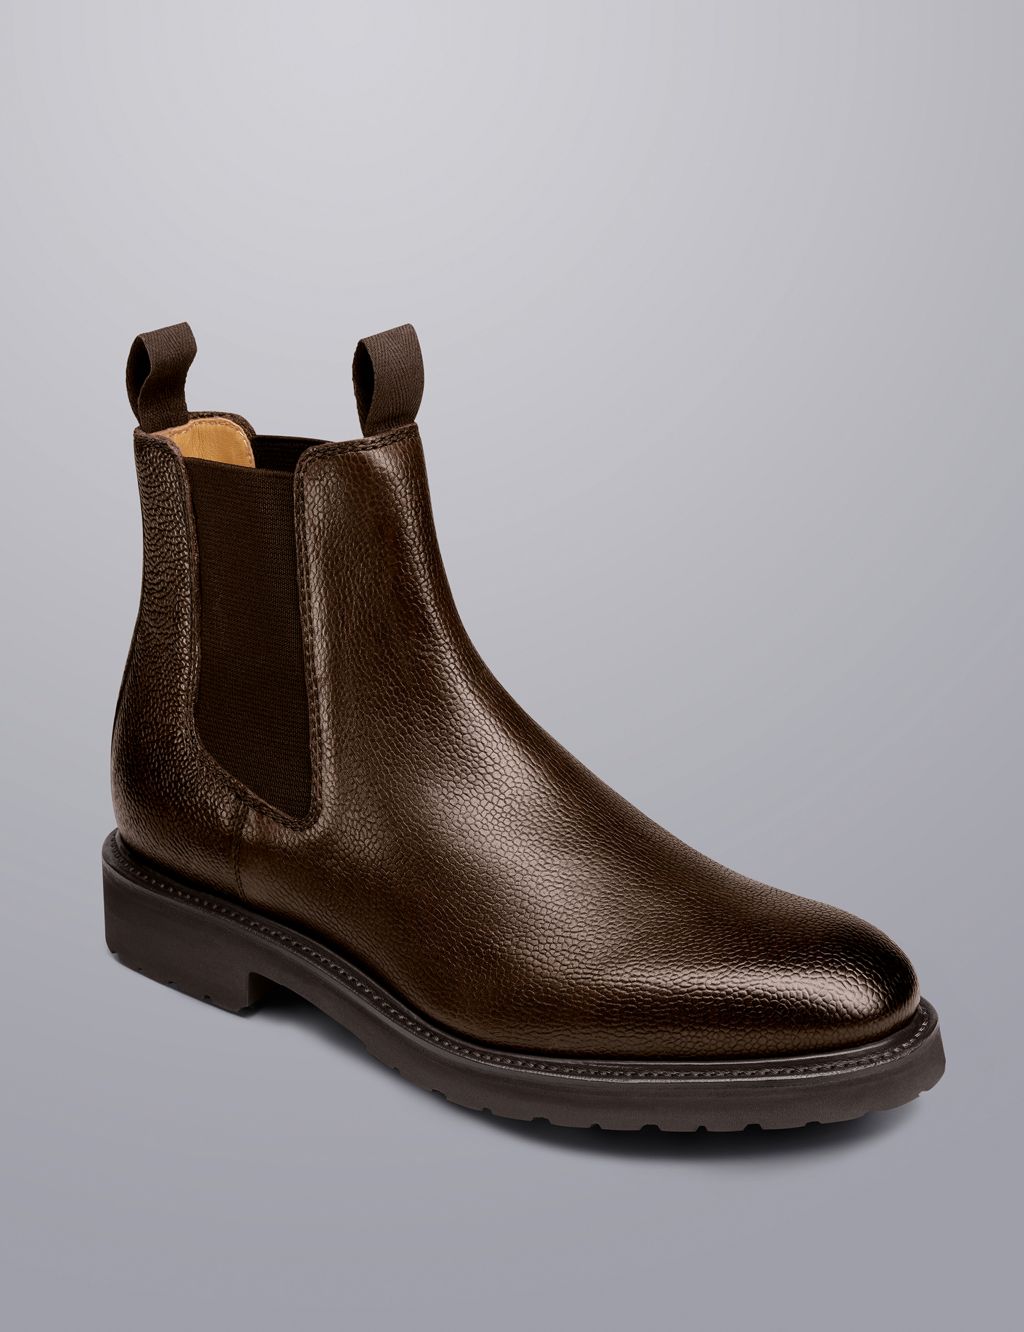 Leather Pull-On Chelsea Boots image 3